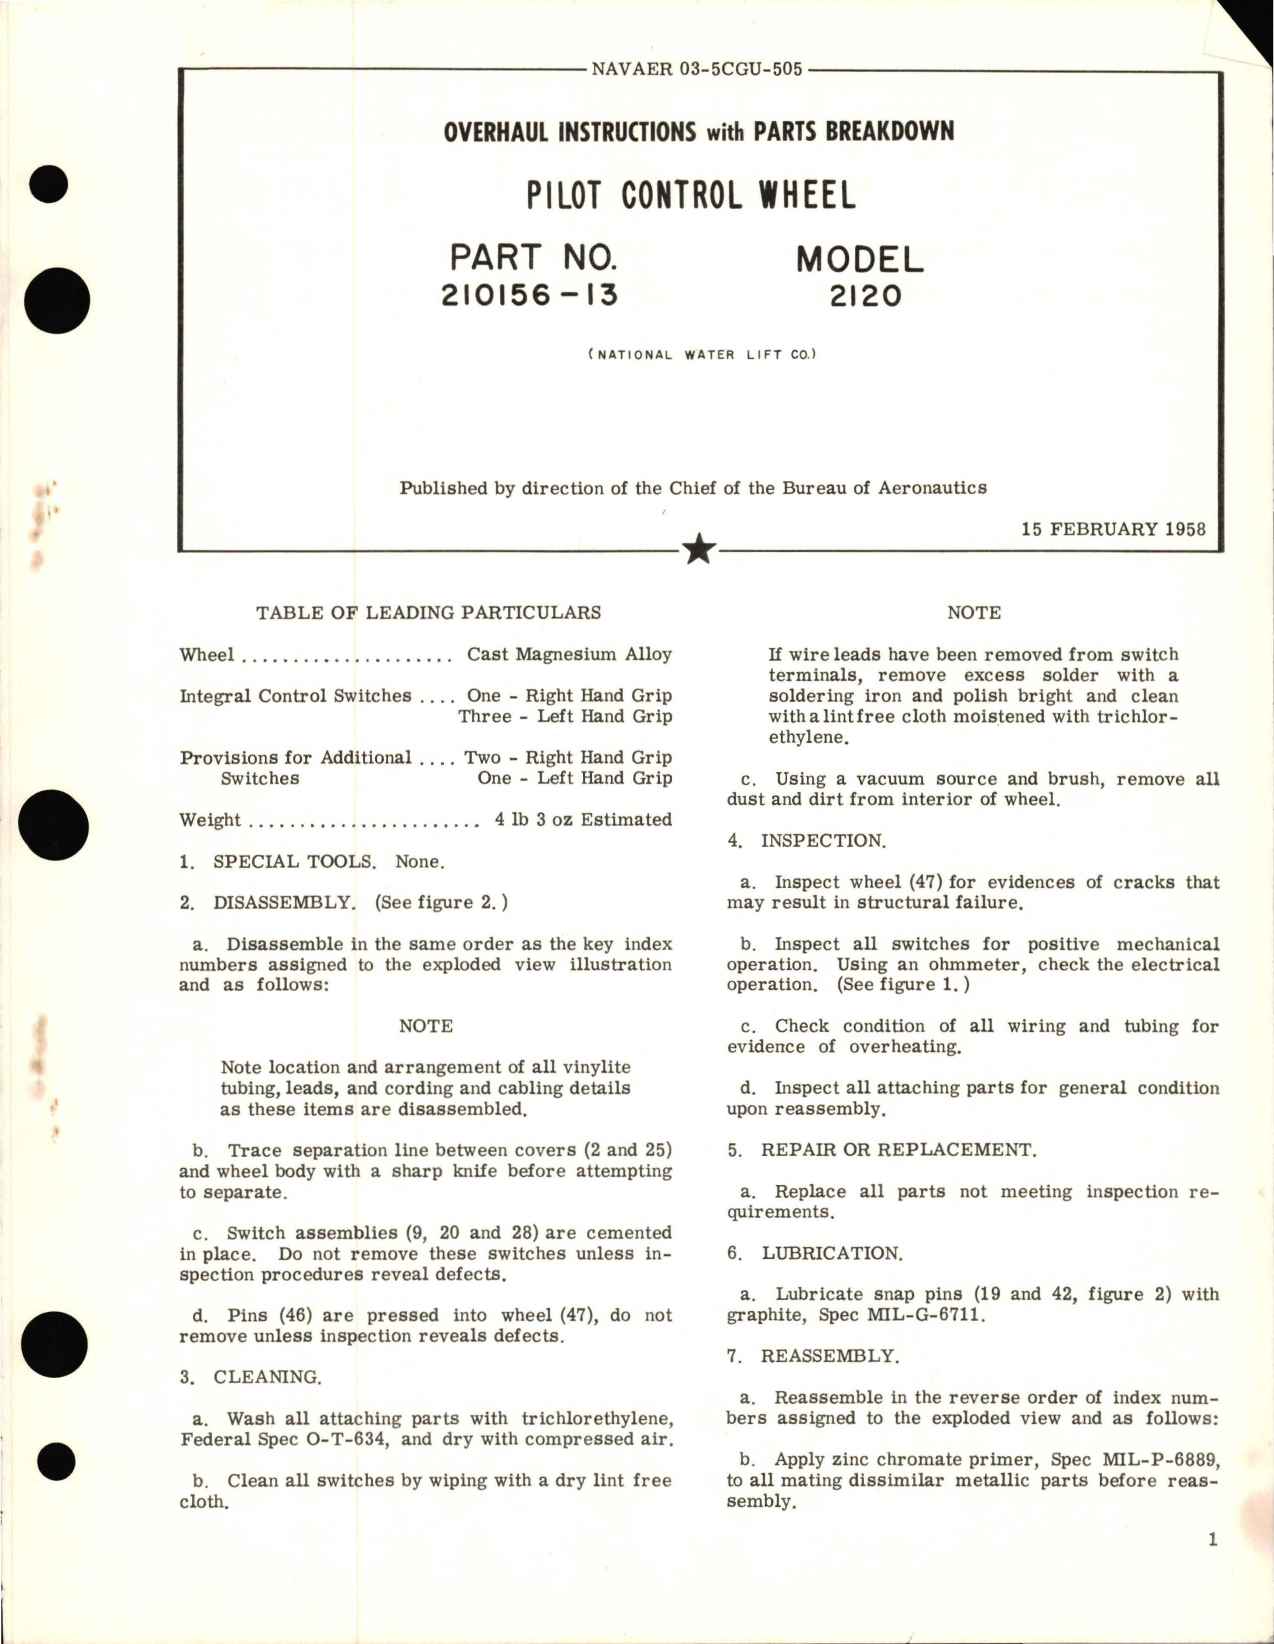 Sample page 1 from AirCorps Library document: Overhaul Instructions with Parts Breakdown for Pilot Control Wheel - Part 210156-13 - Model 2120